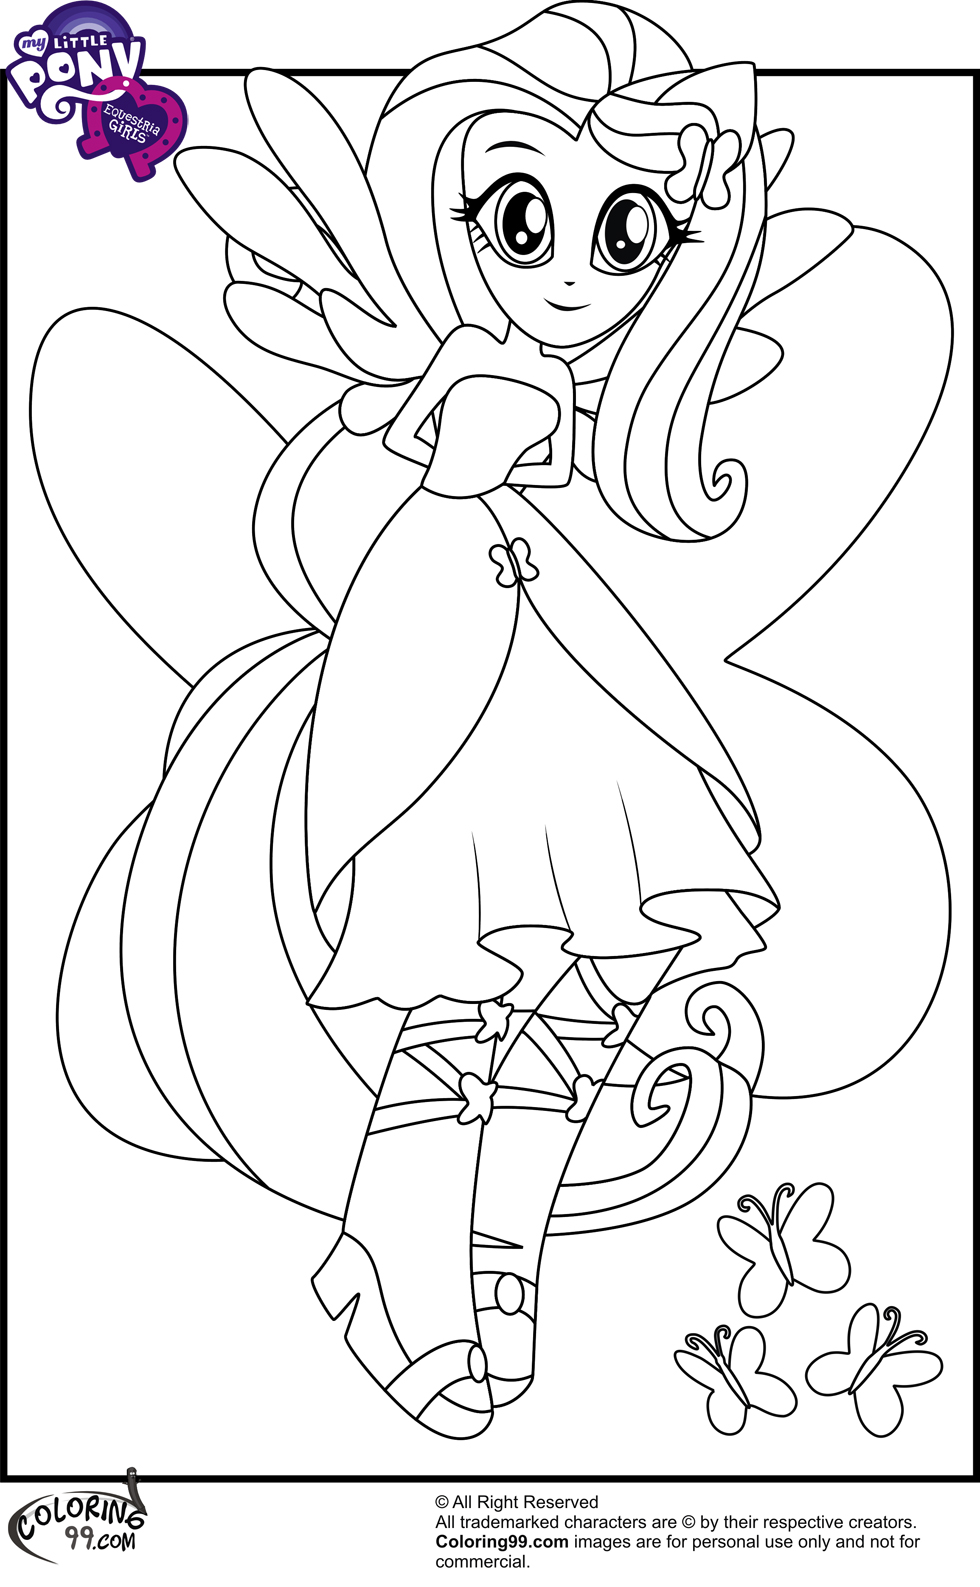 Download My Little Pony Equestria Girls Coloring Pages | Minister ...